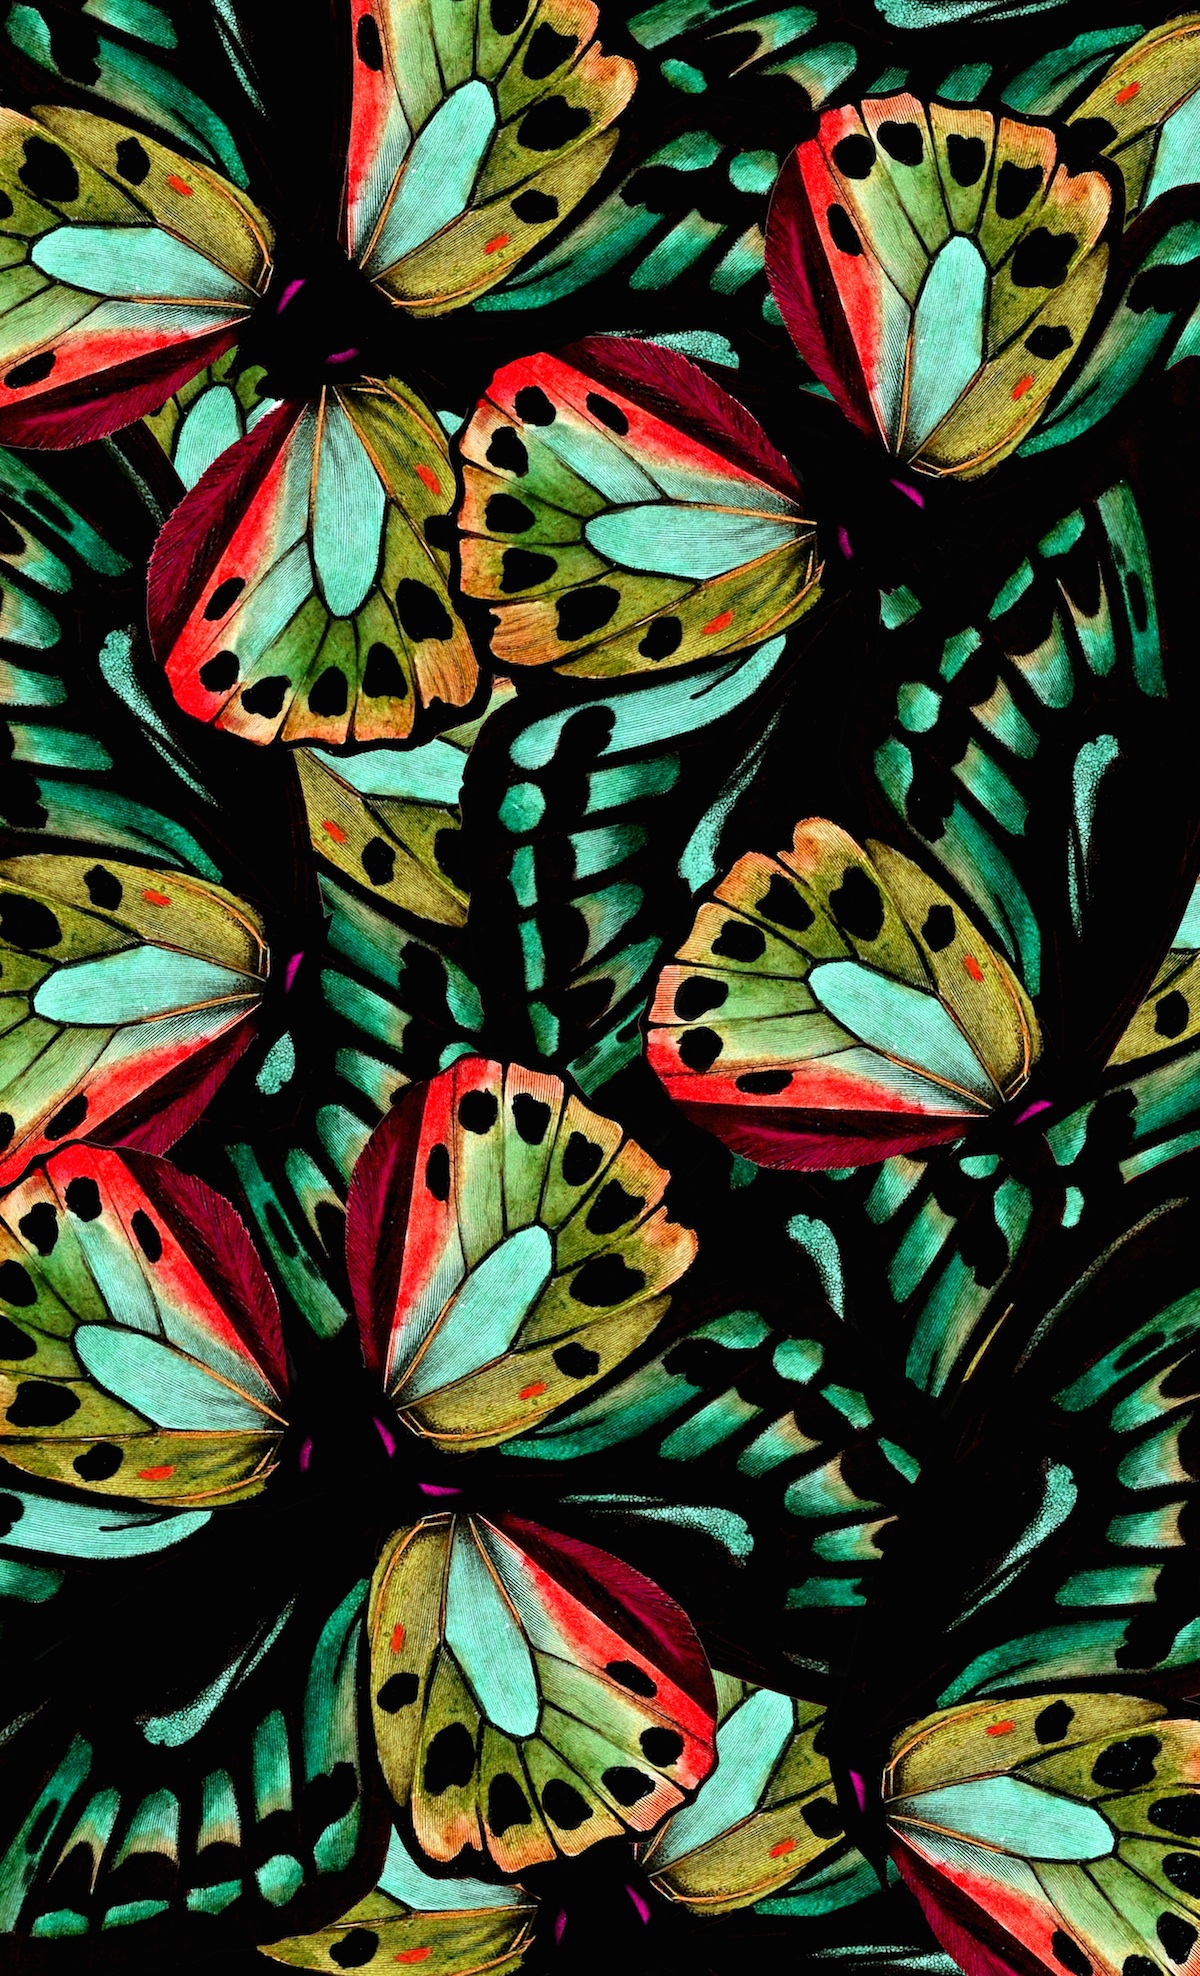 textile Nature butterfly pattern print design repeast repeat photoshop art FINEART paint collage draw color